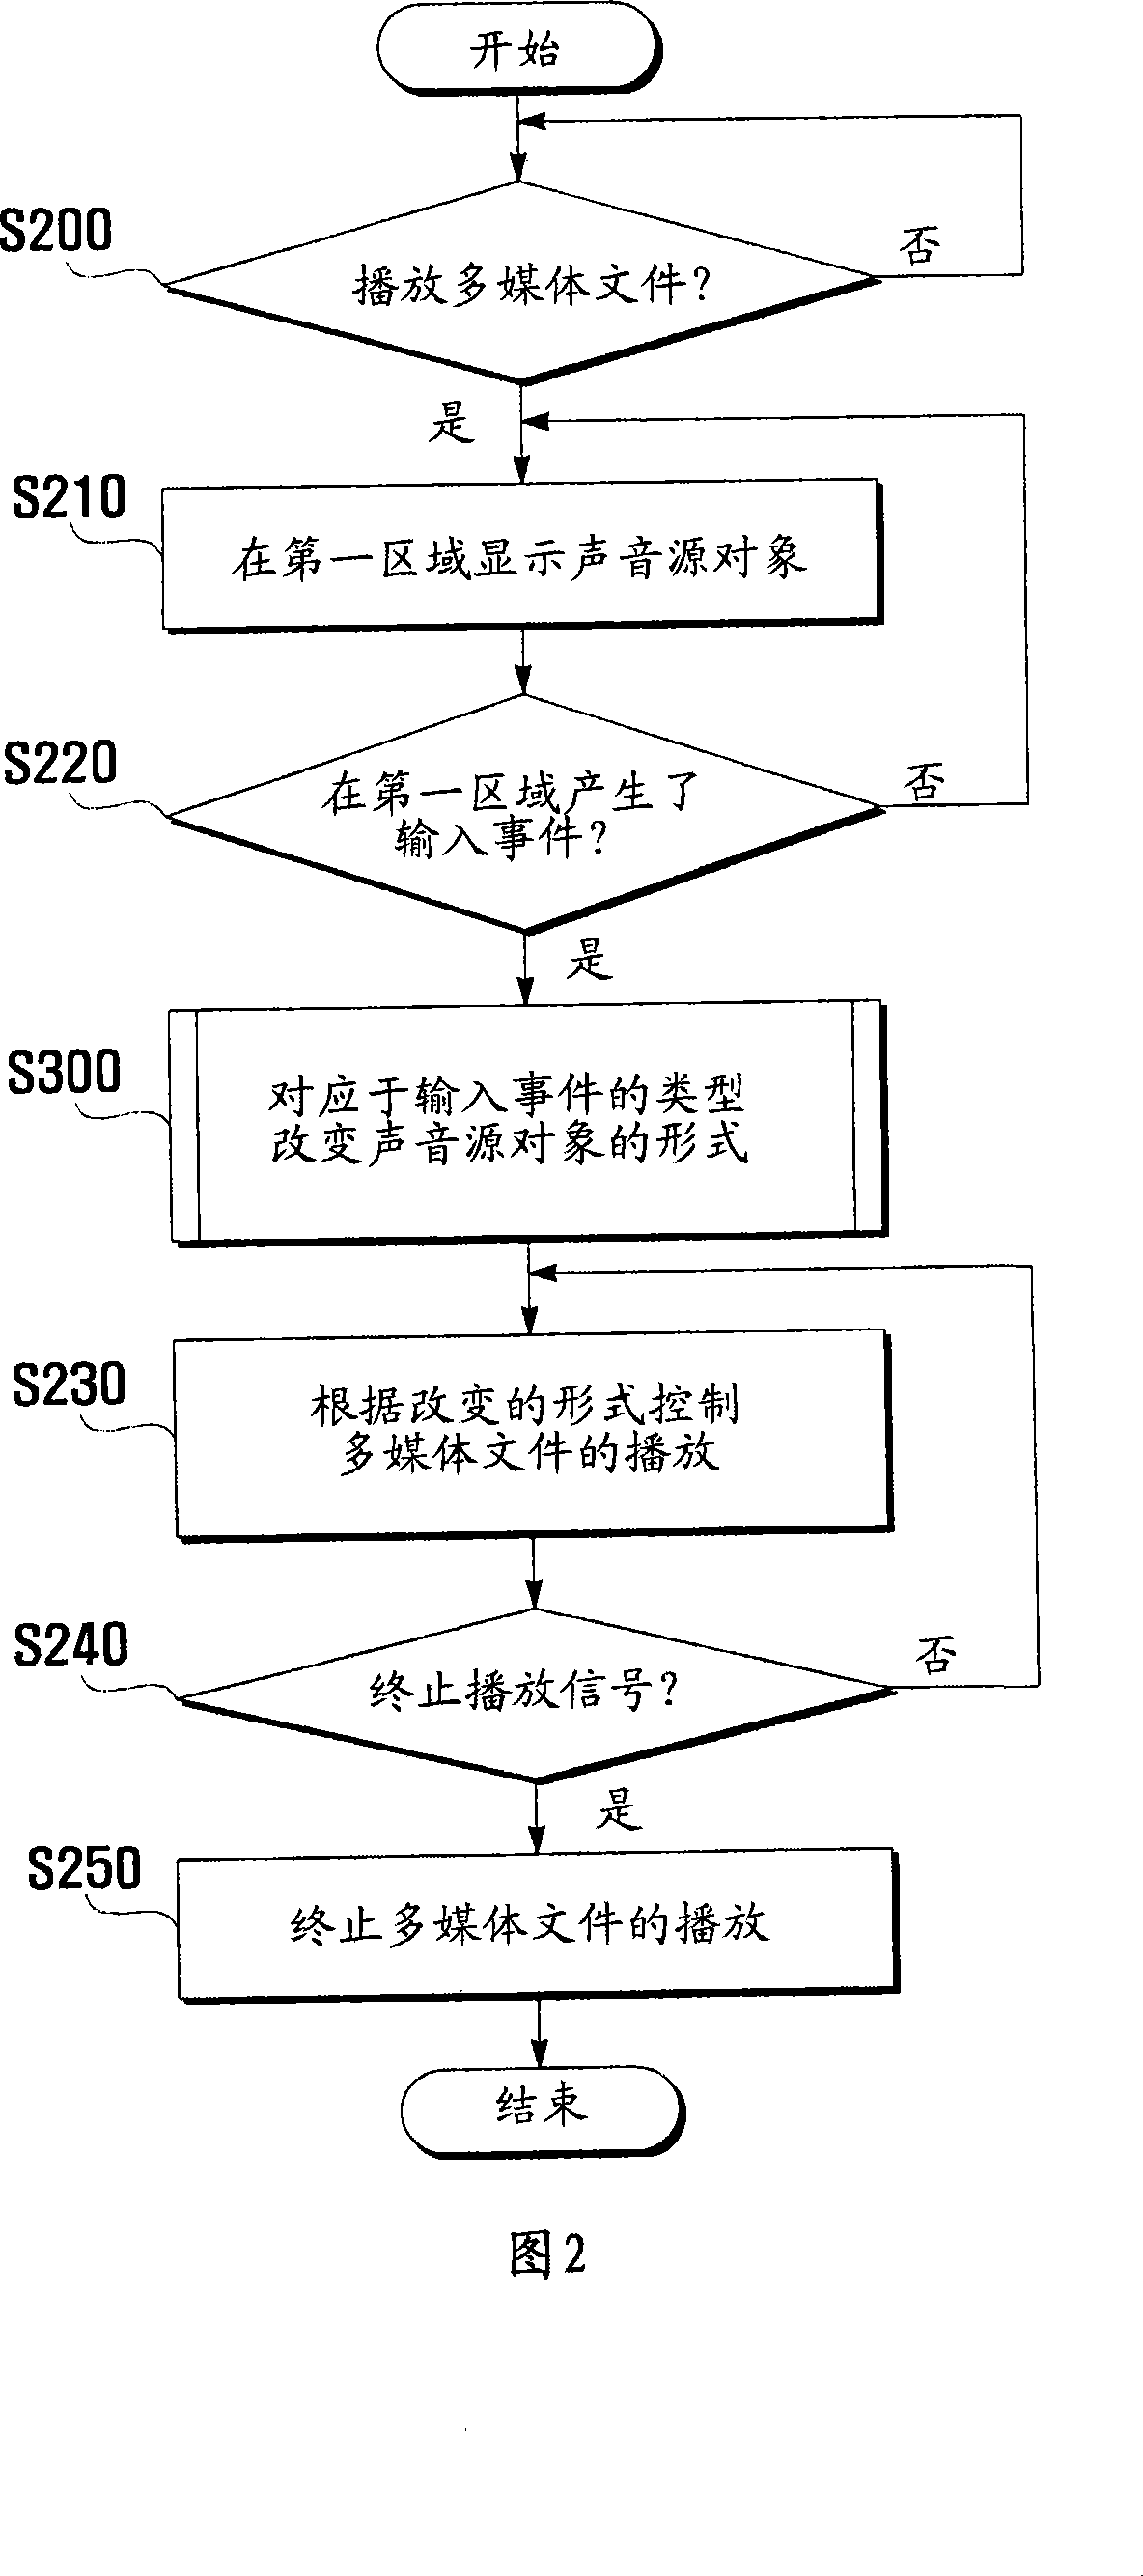 User interface method for a multimedia playing device having a touch screen